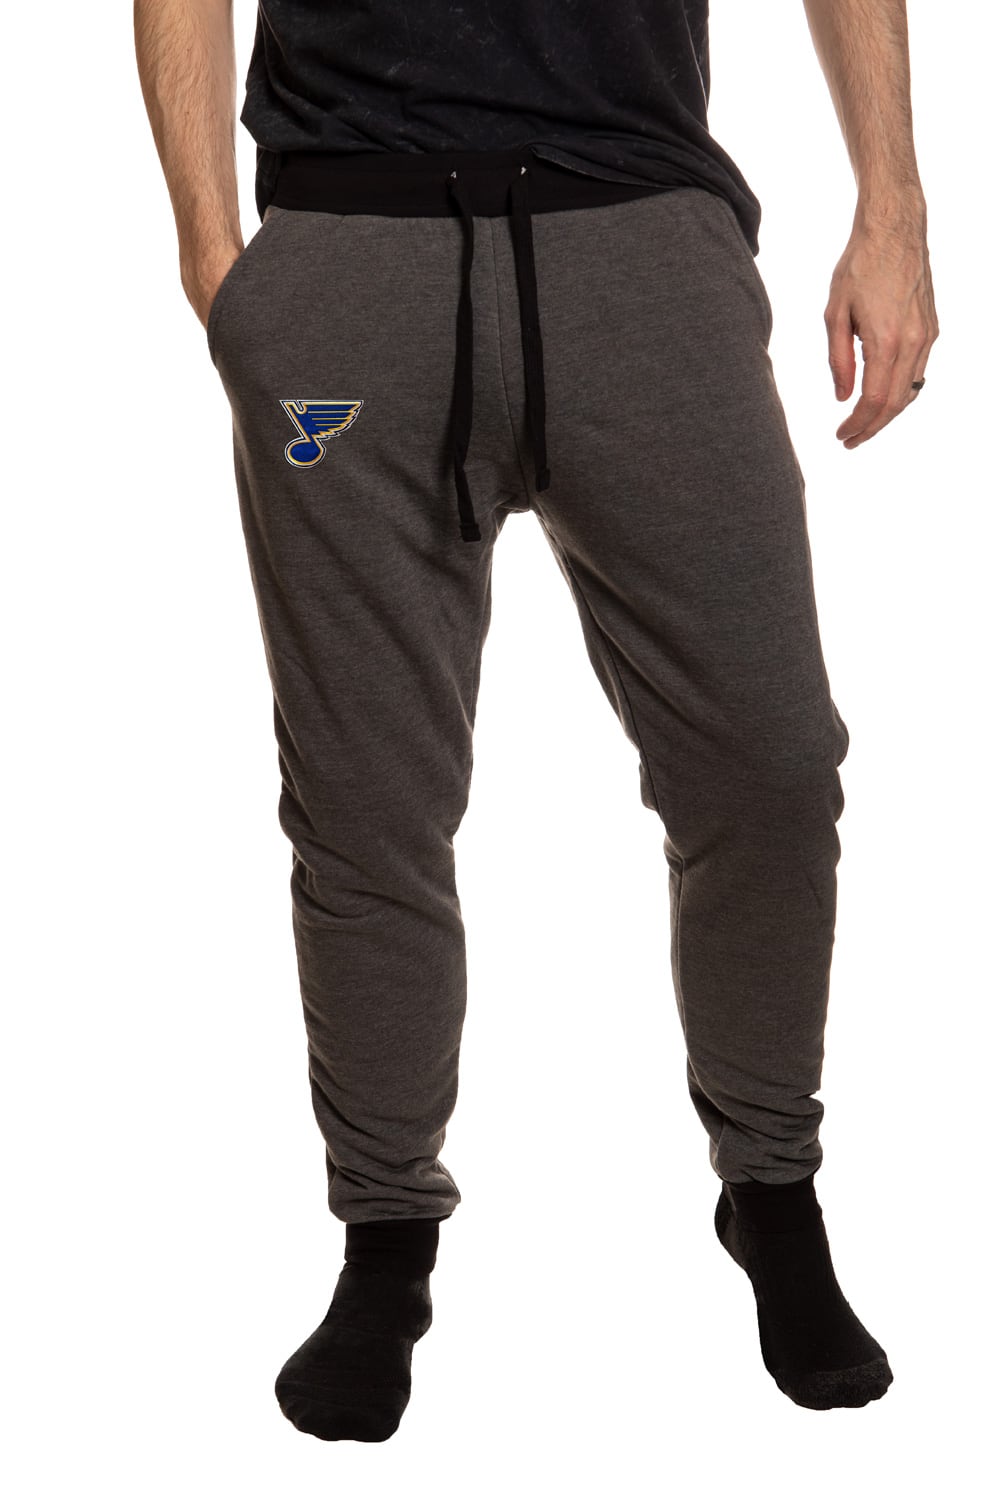 St. Louis Blues Sherpa Lined Sweatpants with Pockets